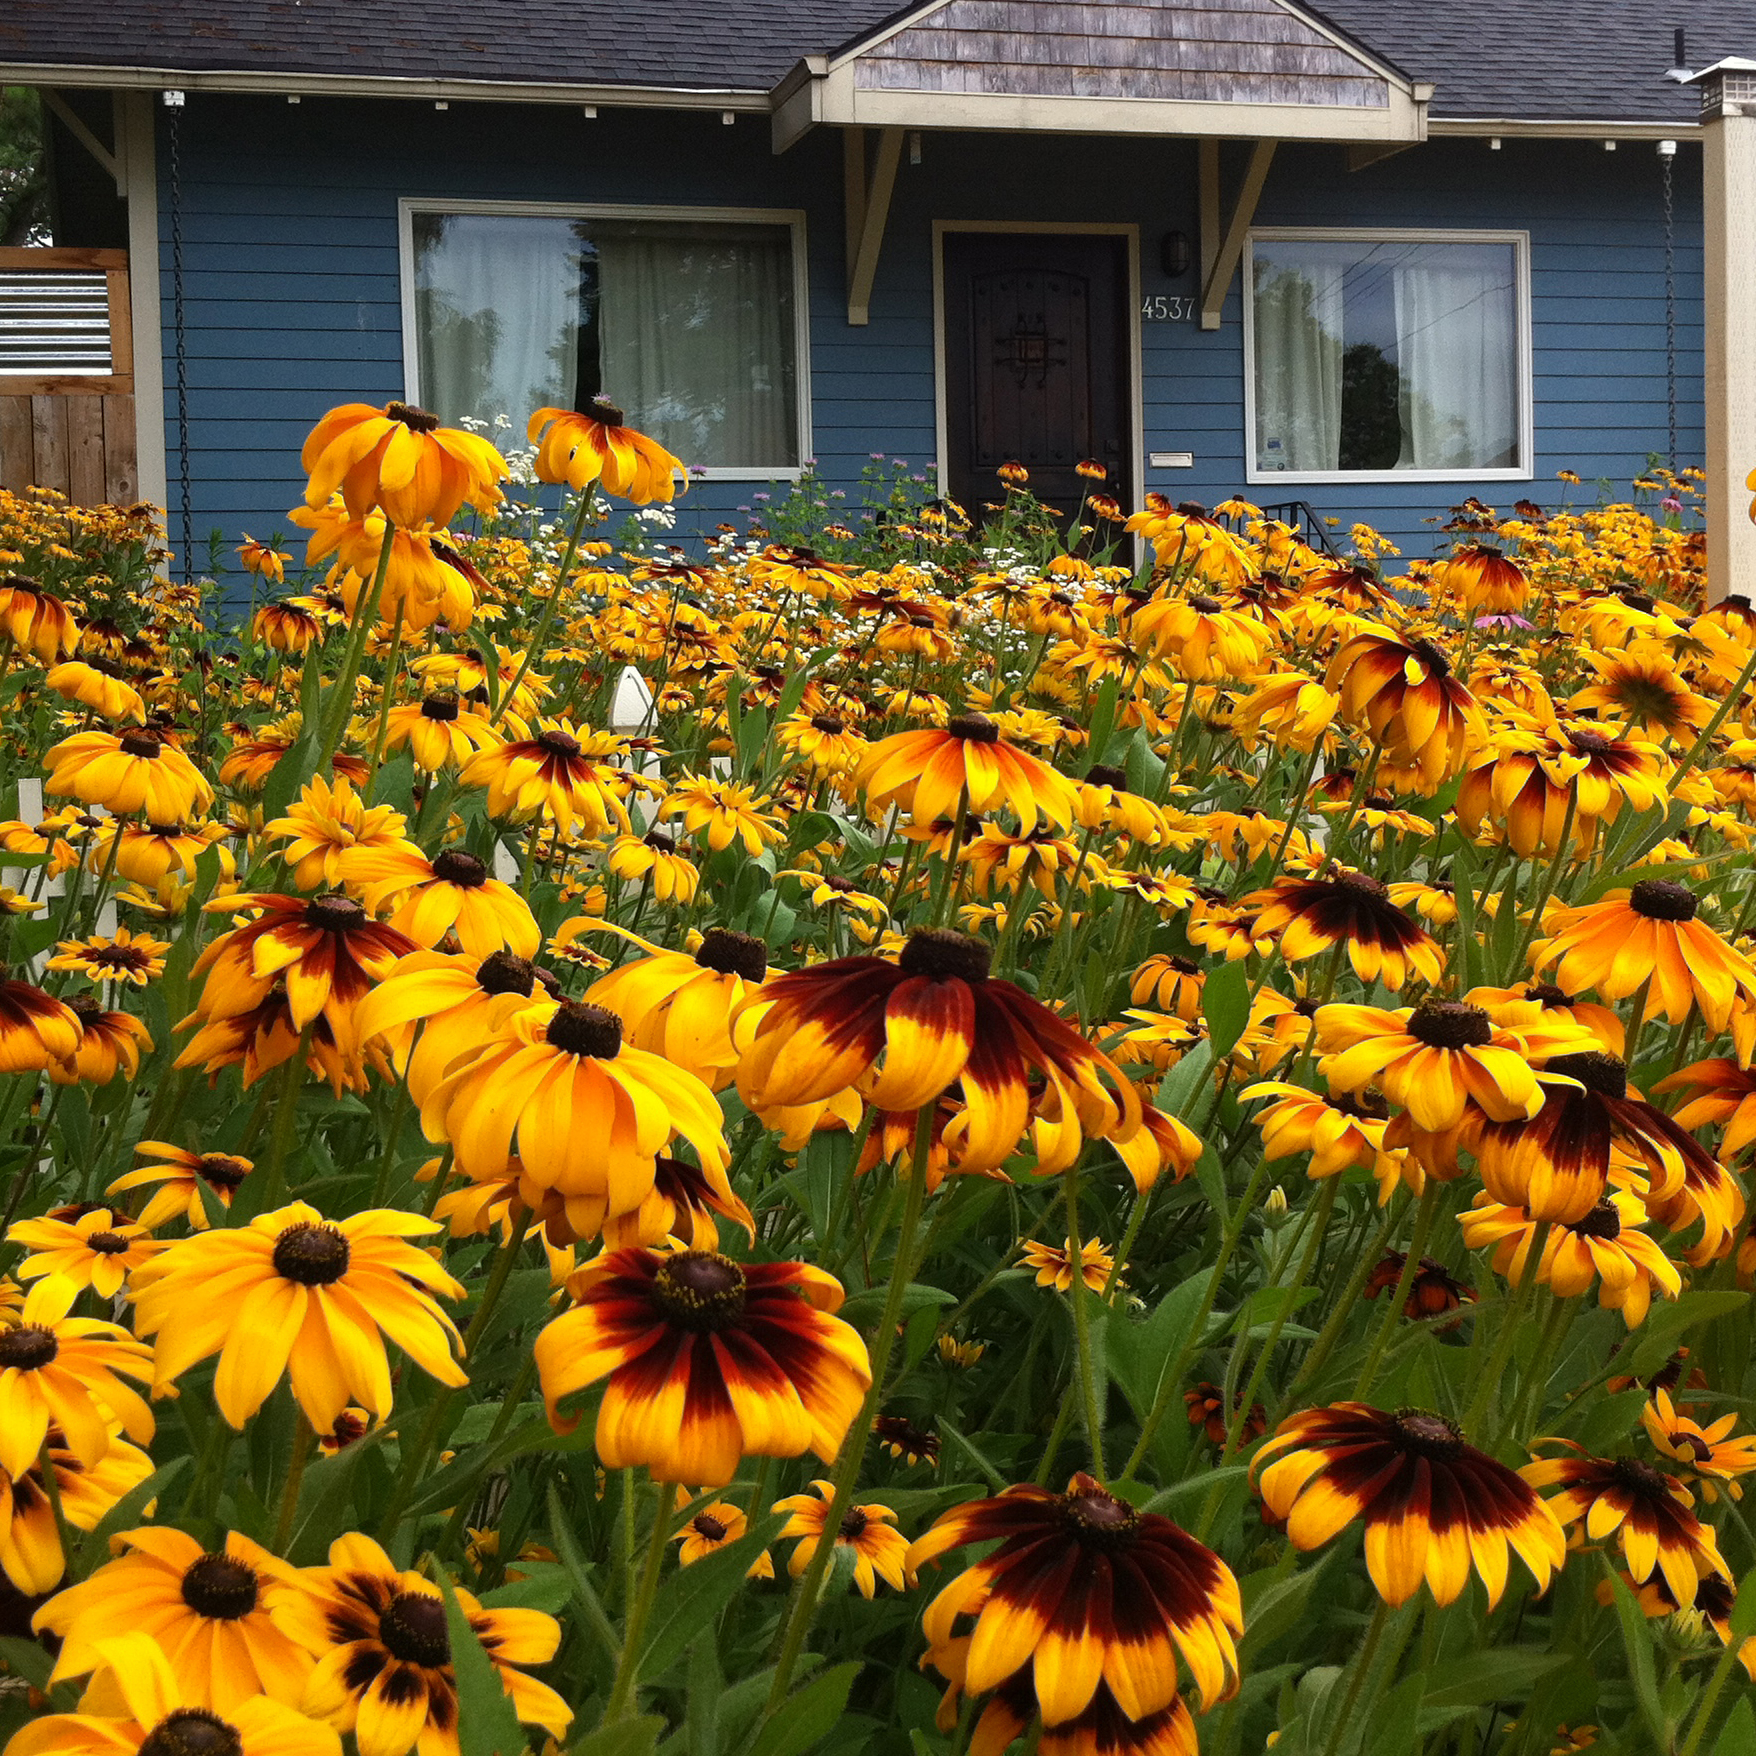 A yard bursting with bright yellow black-eyed Susans nearly obscures the blue house behind it.